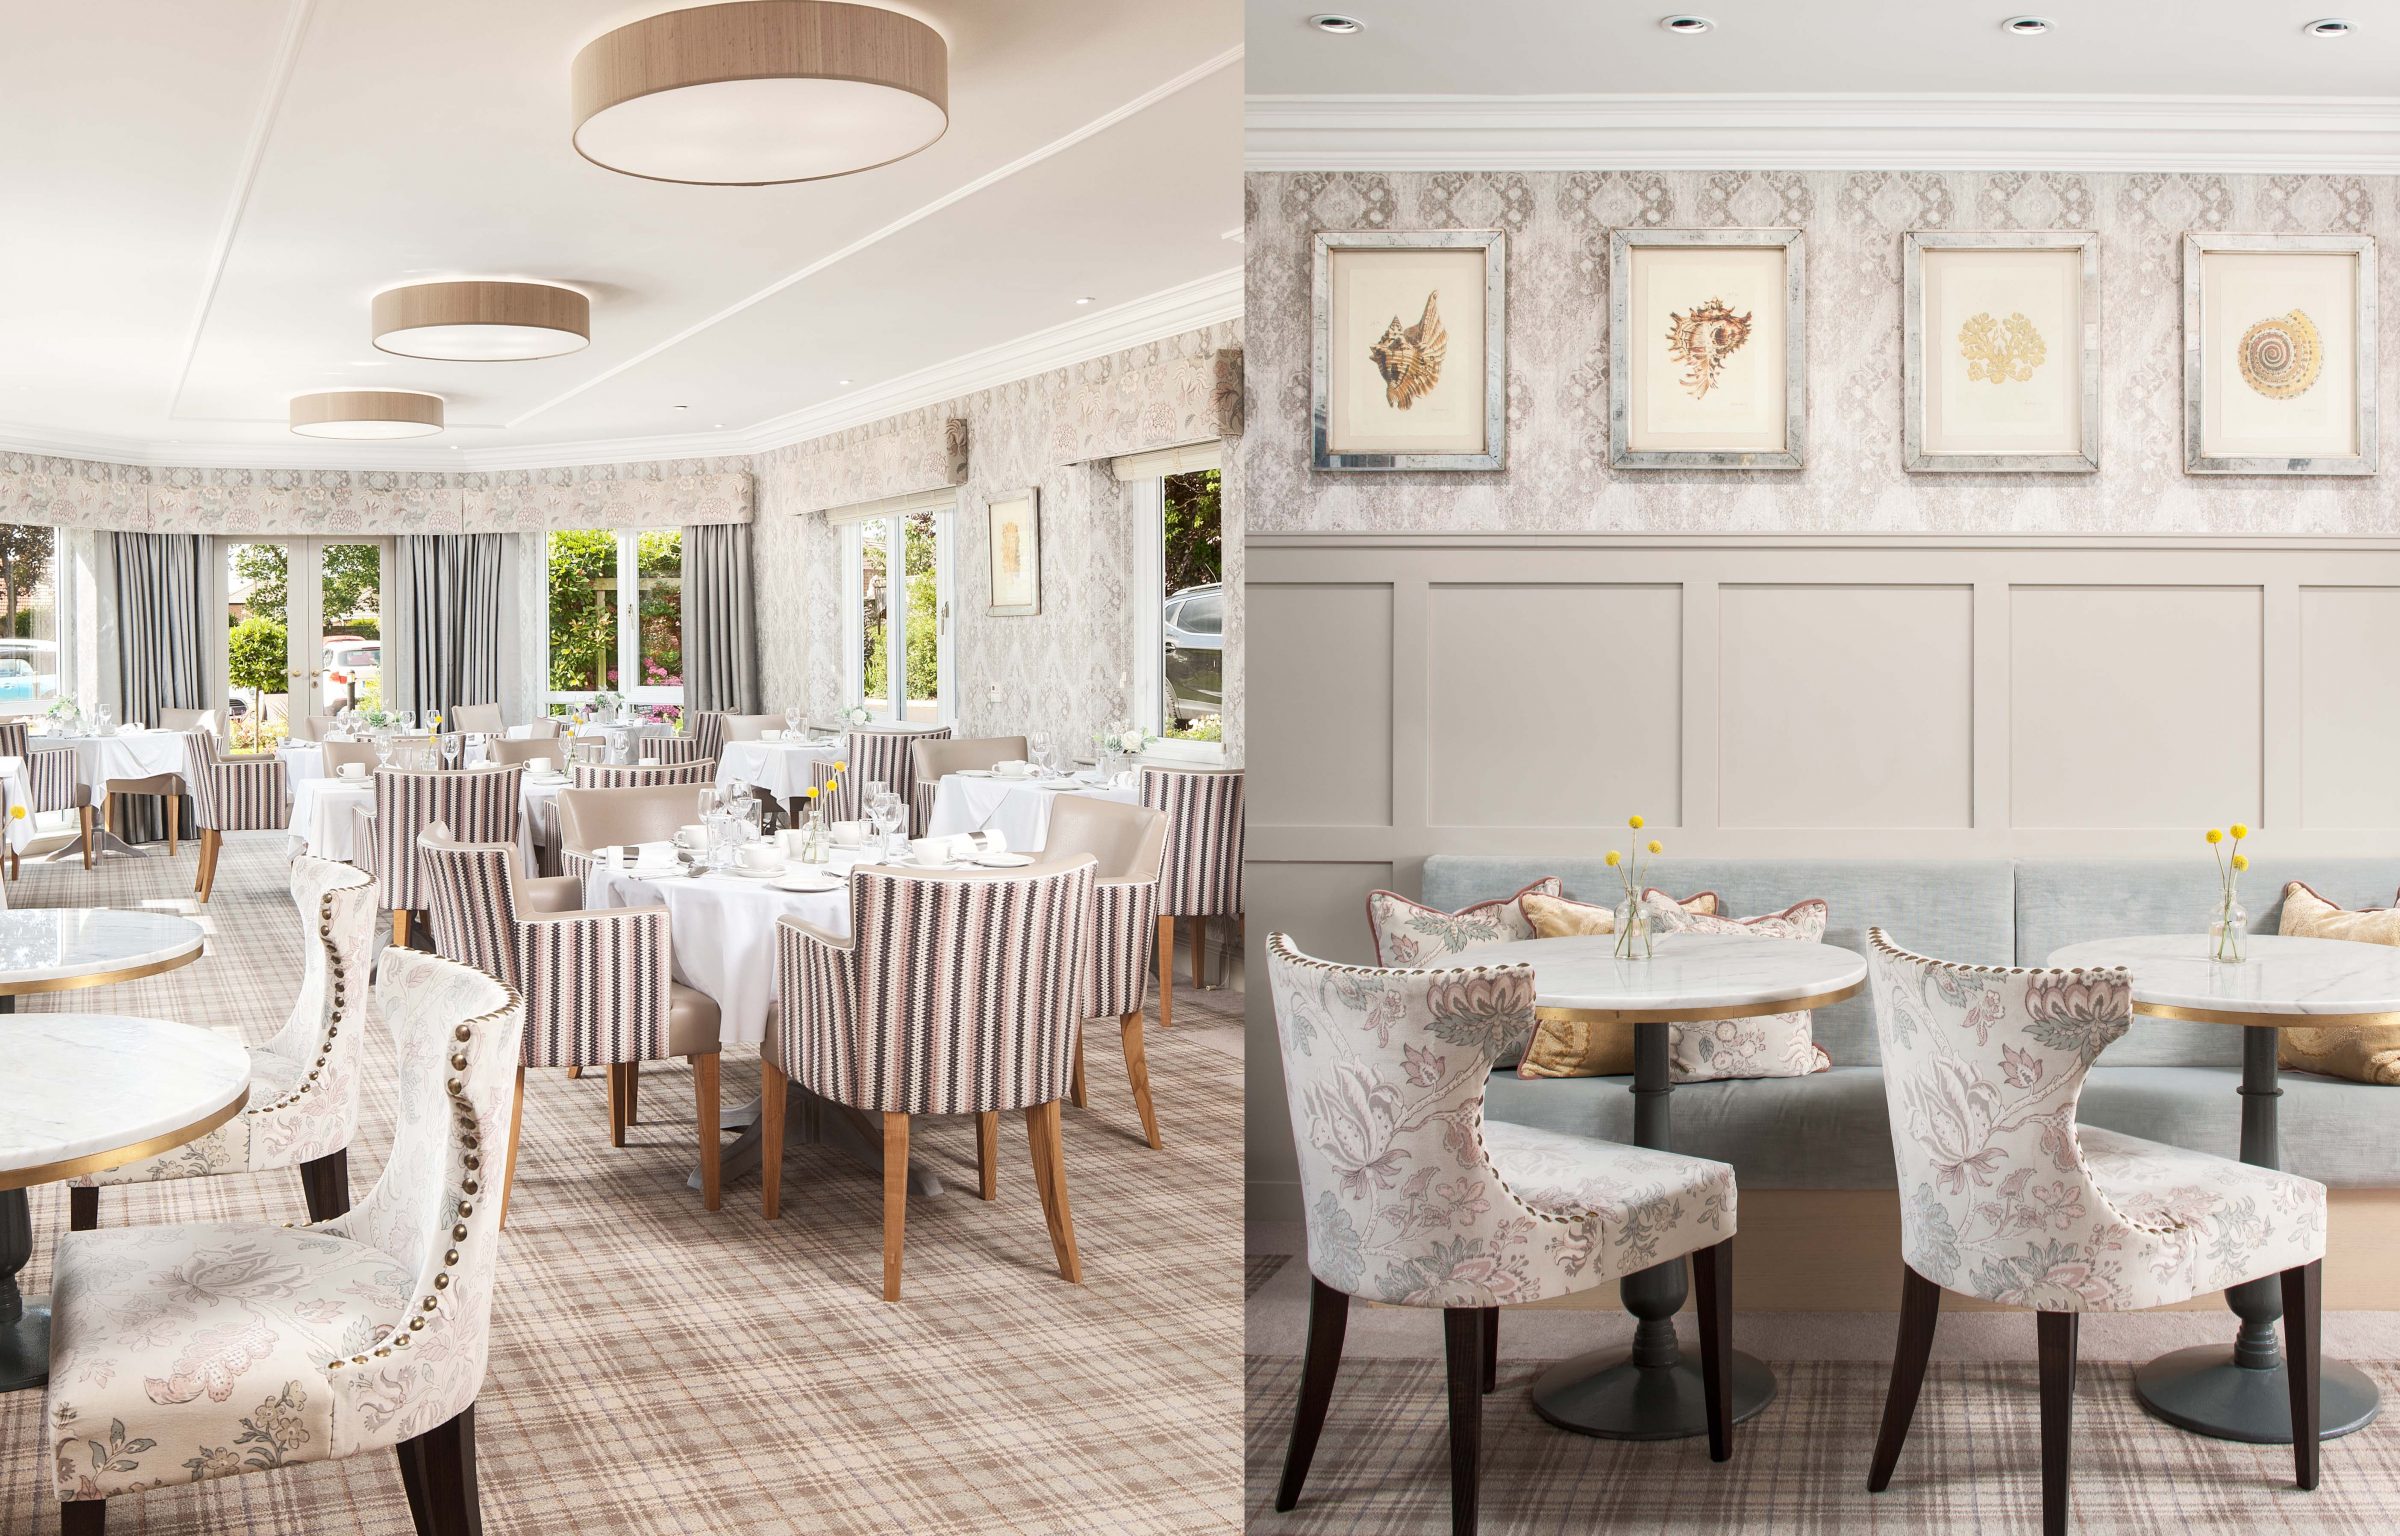 Bernard Interiors project for Hadrian Healthcare at The Manor House in Gosforth.